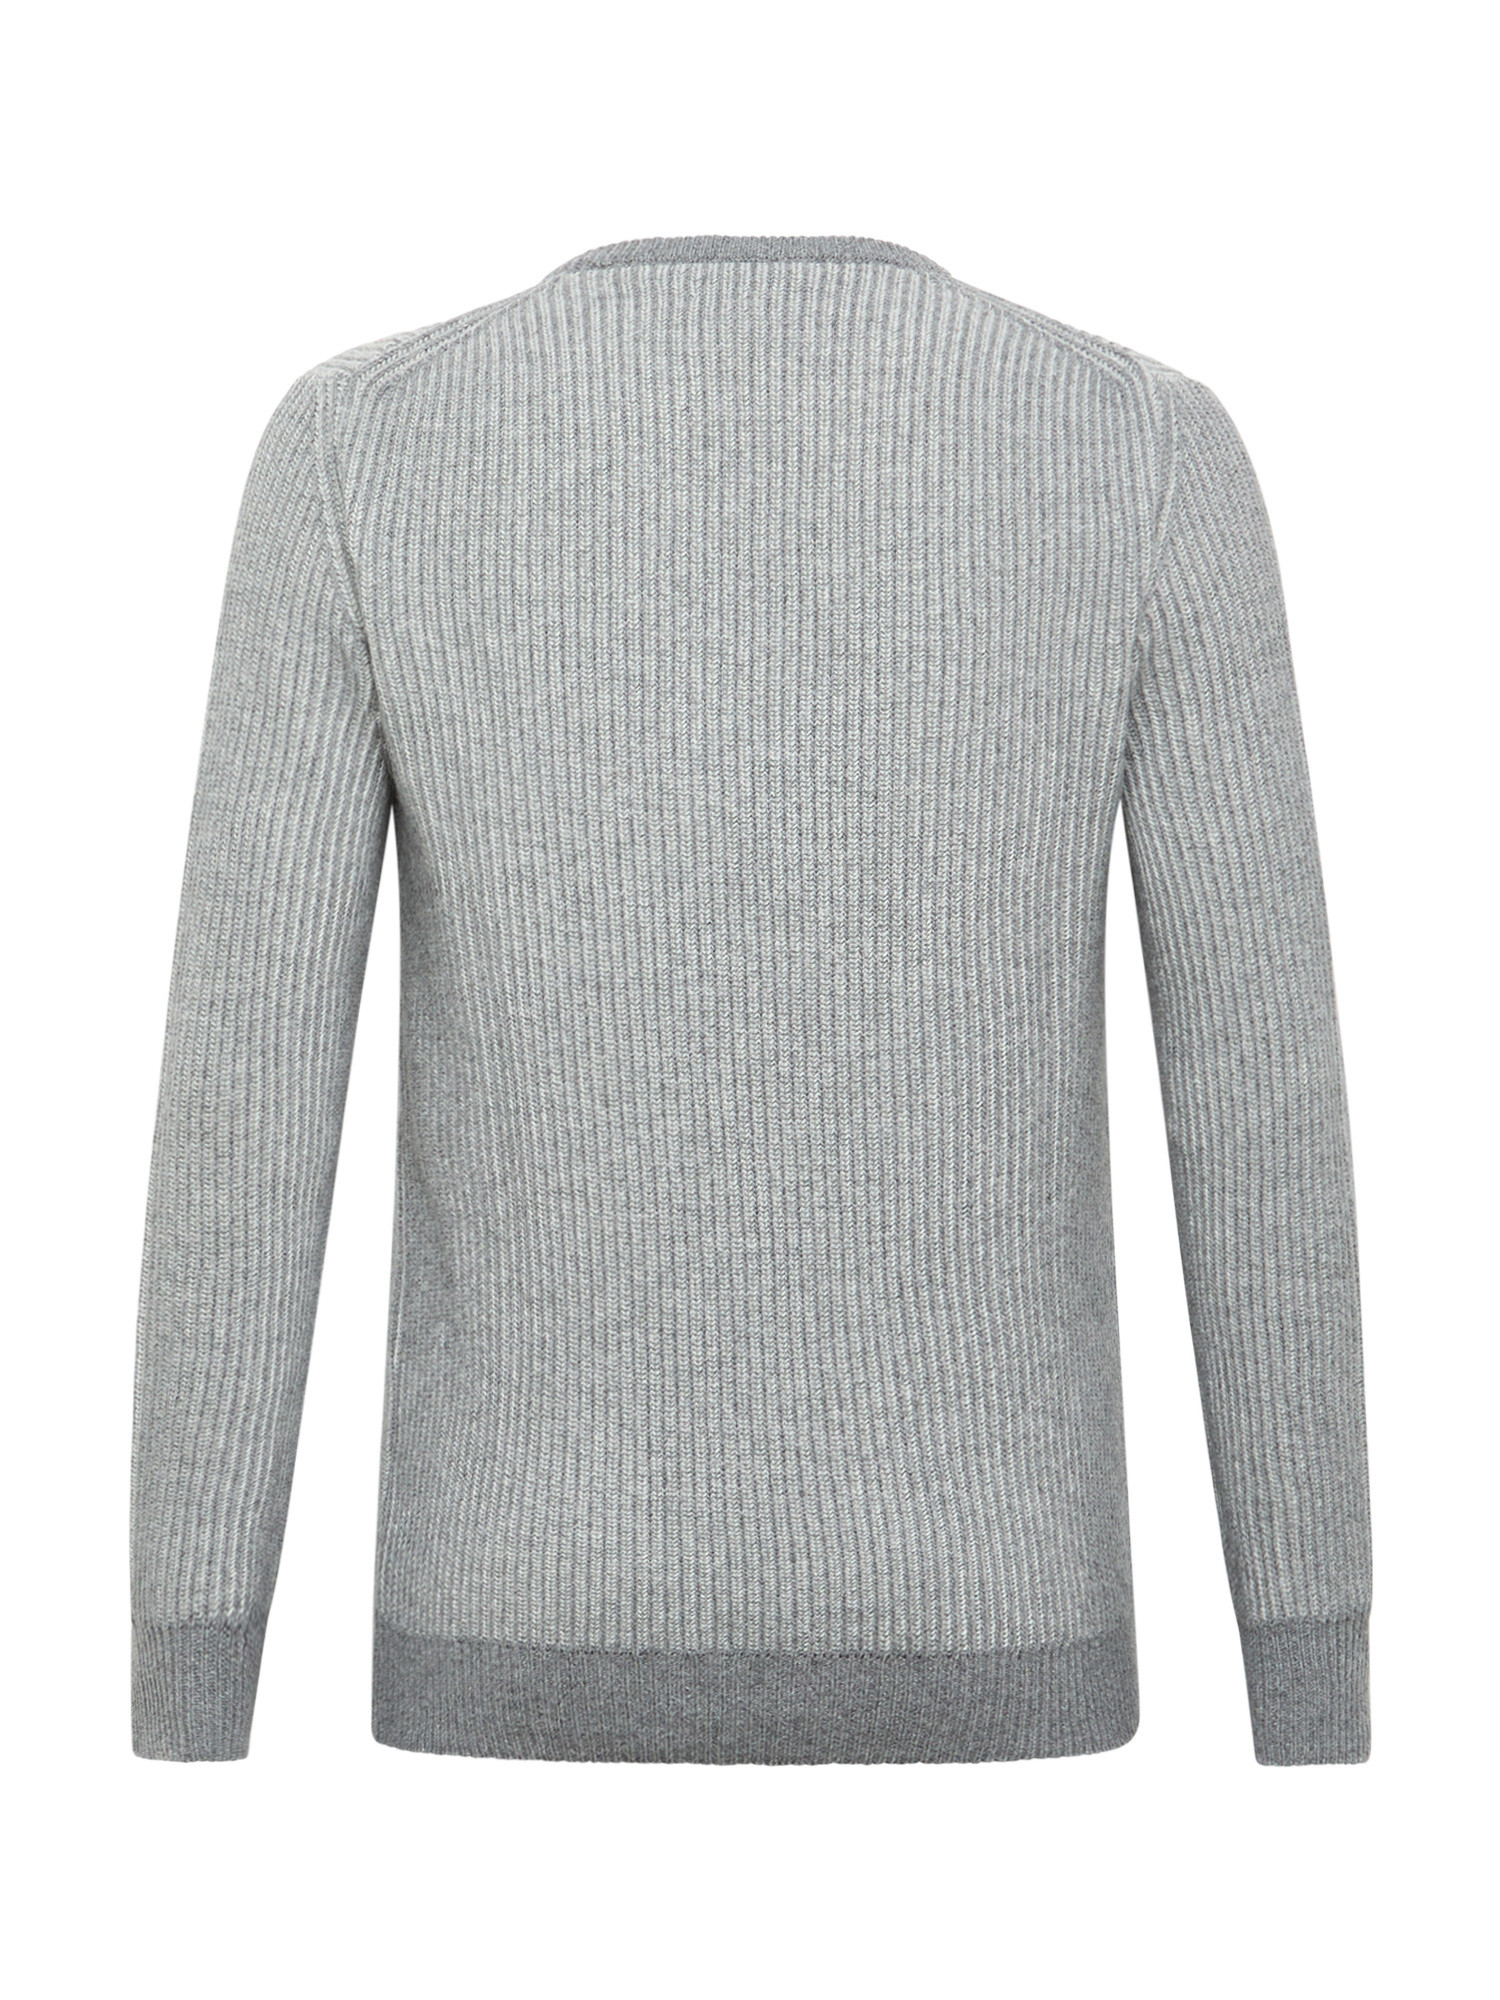 Luca D'Altieri - Cashmere blend crew neck sweater with noble fibres, Pearl Grey, large image number 1